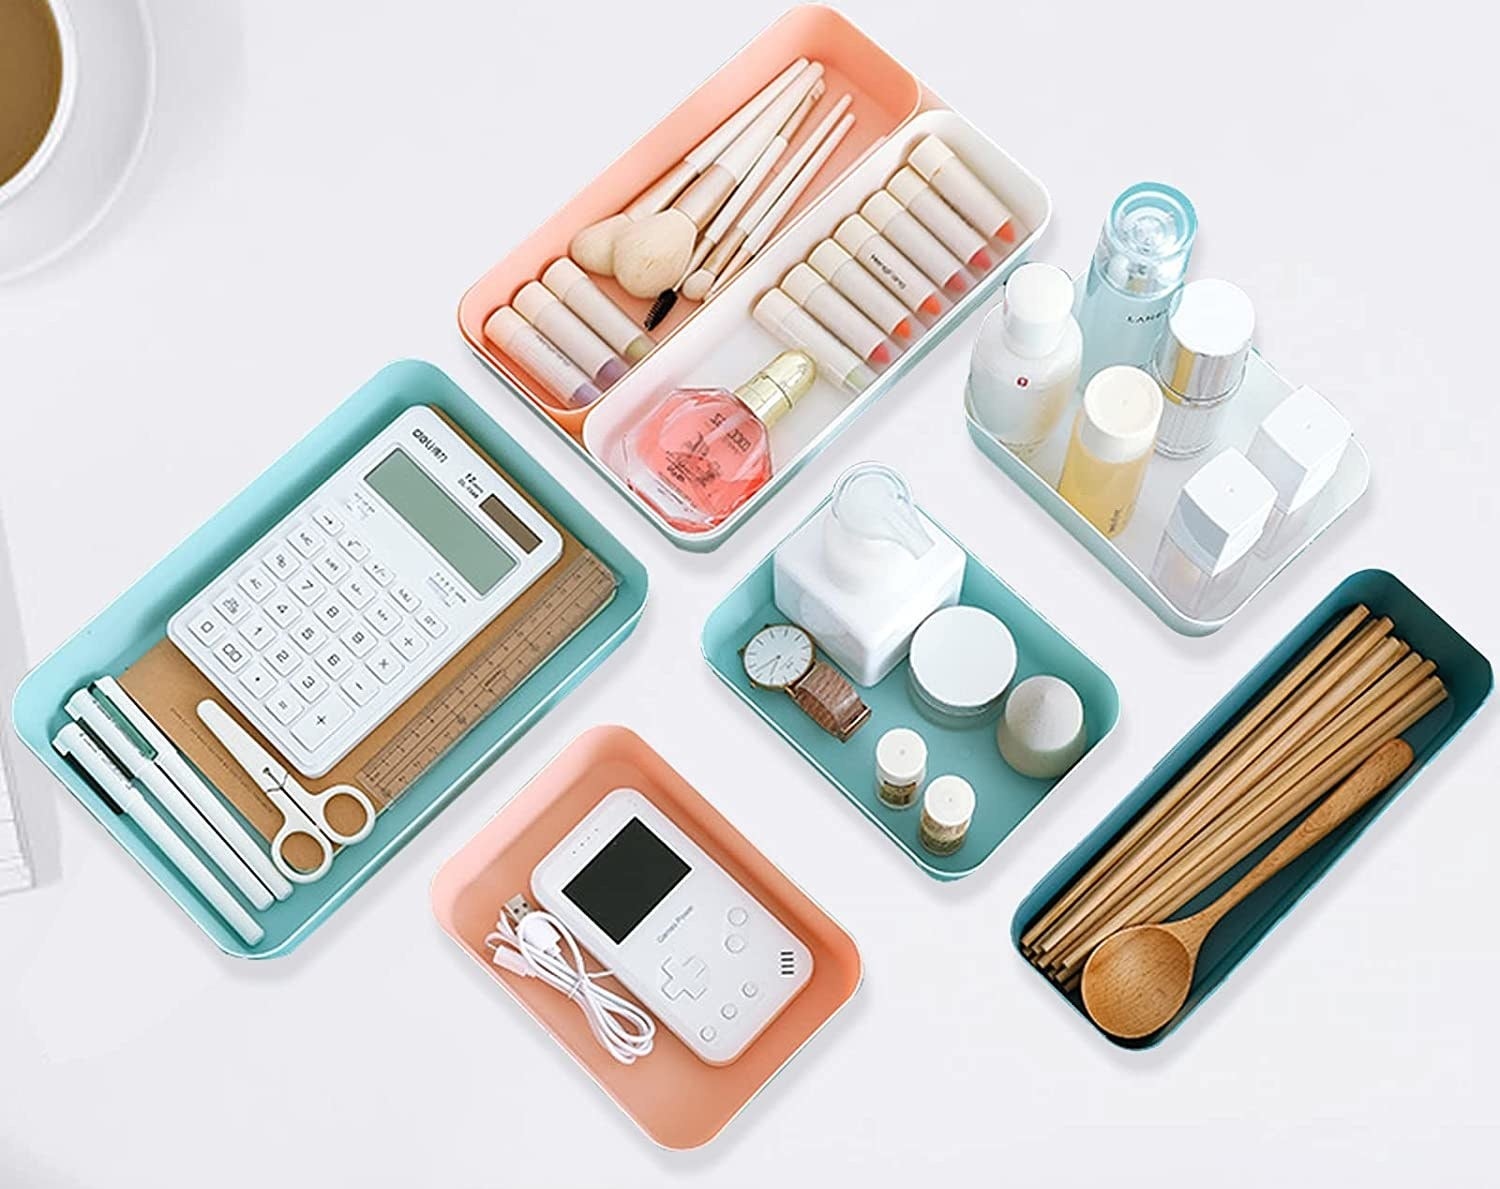 a set of colourful plastic drawer organizers filled with makeup, office supplies, and kitchen utensils